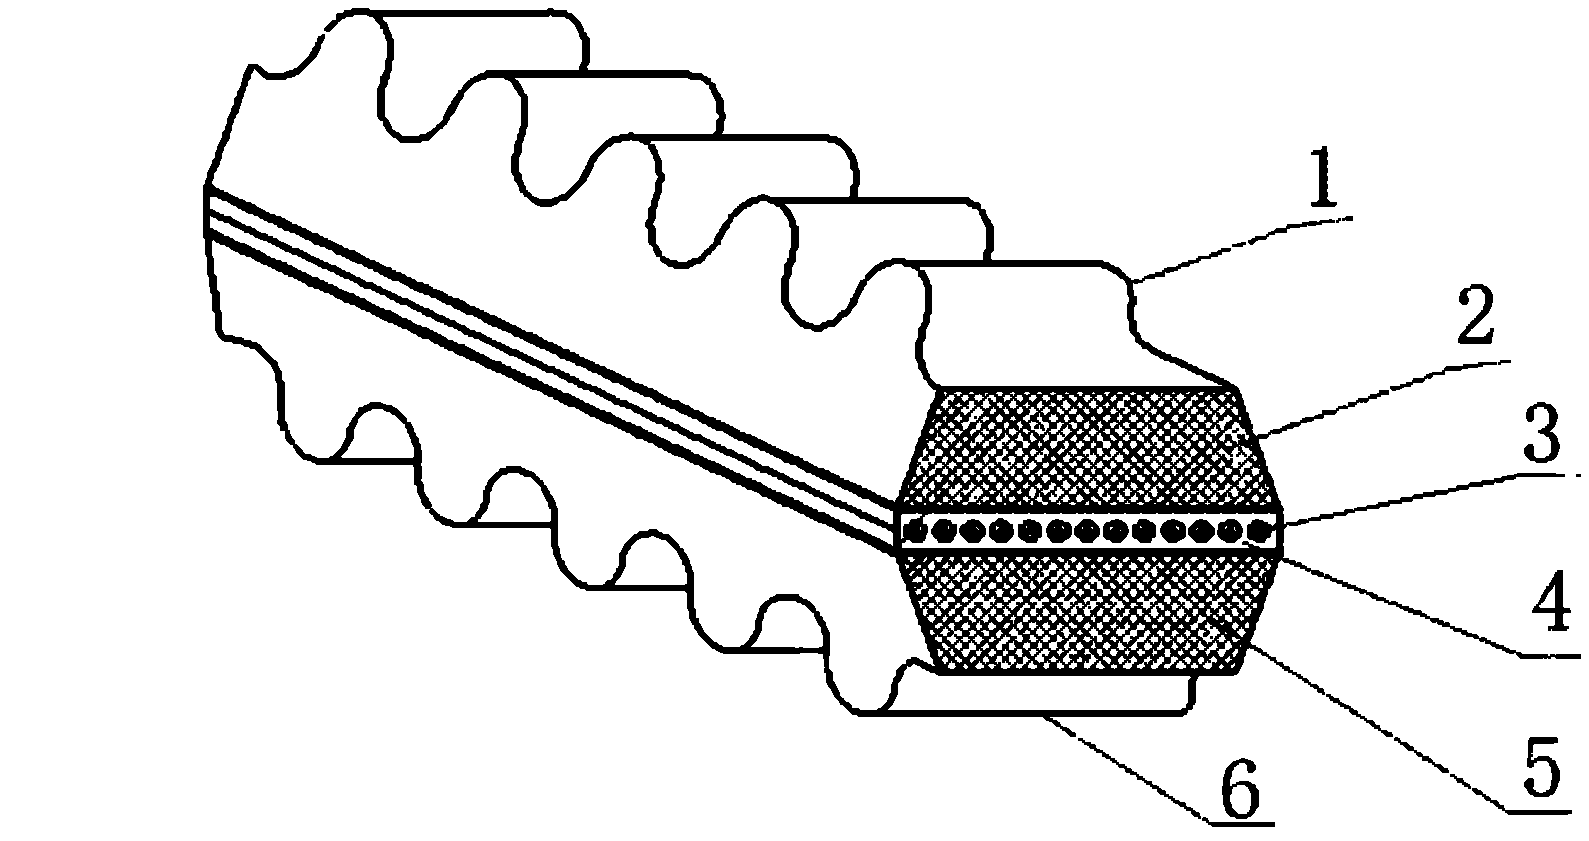 Production technology of double-surface clipping V-shaped band